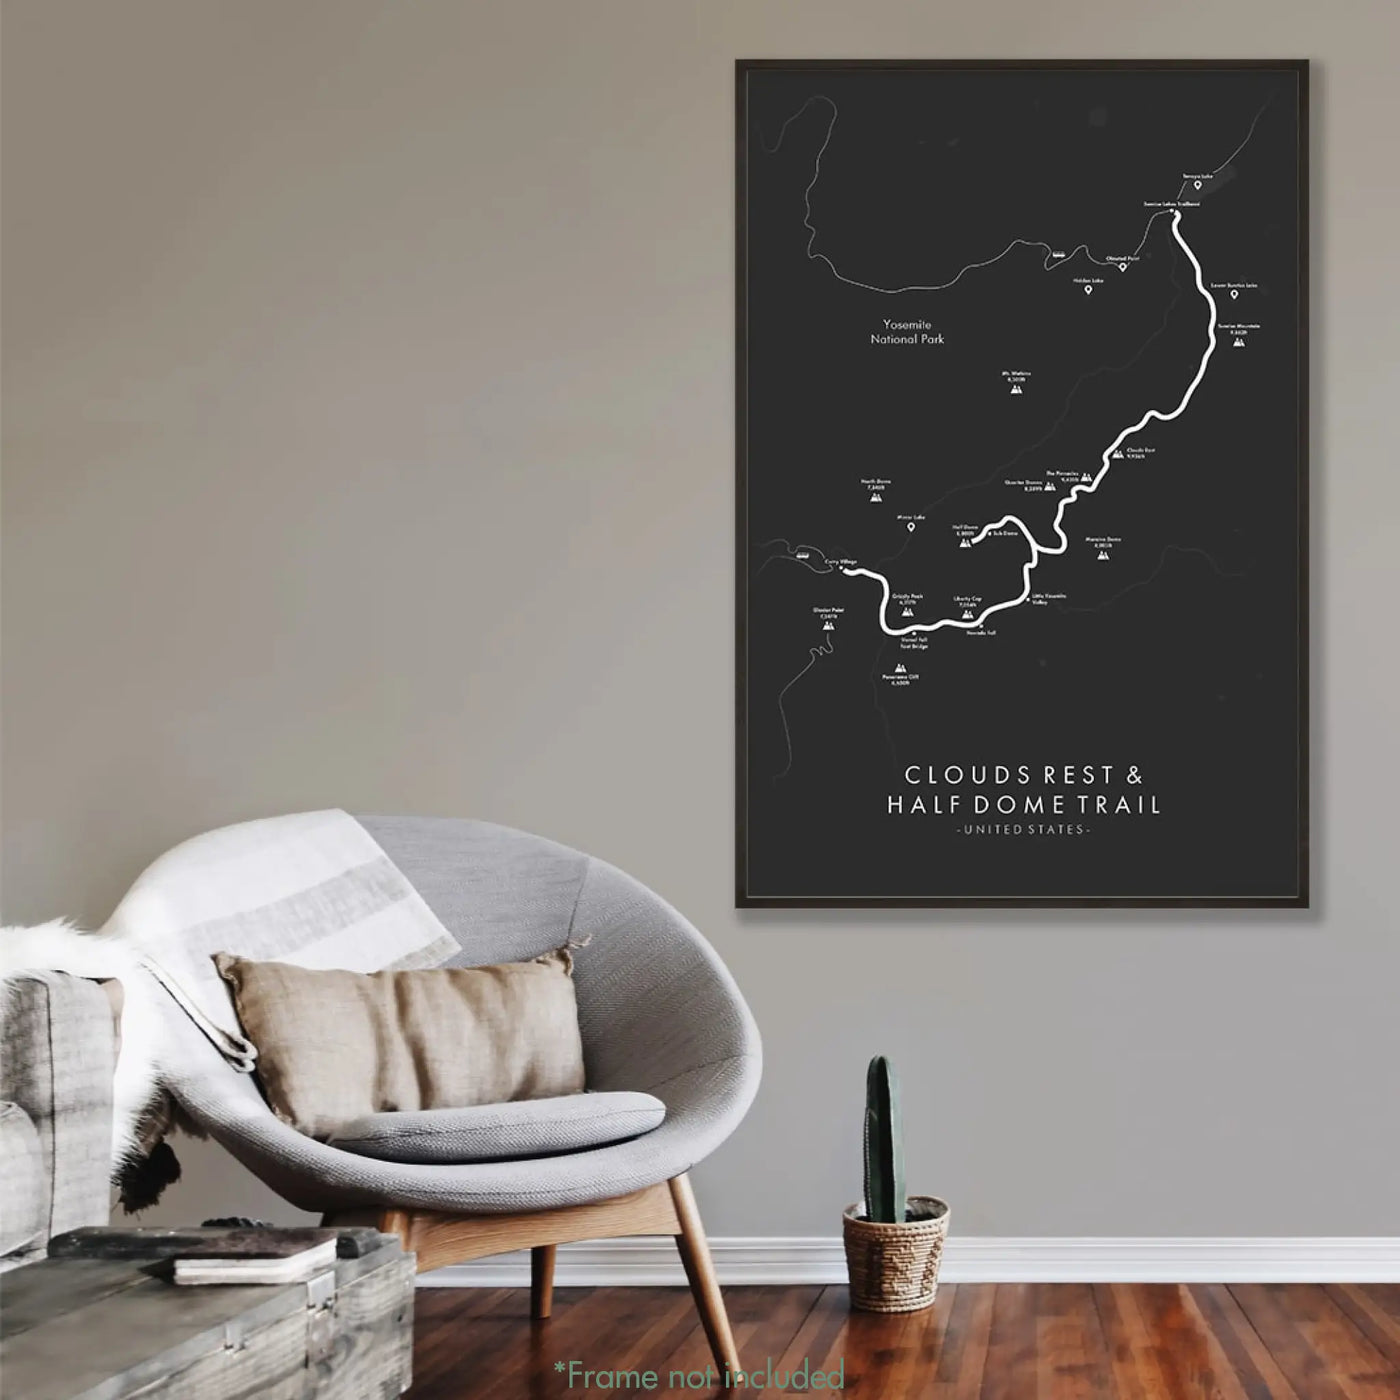 Trail Poster of Clouds Rest & Half Dome Trail - Grey Mockup